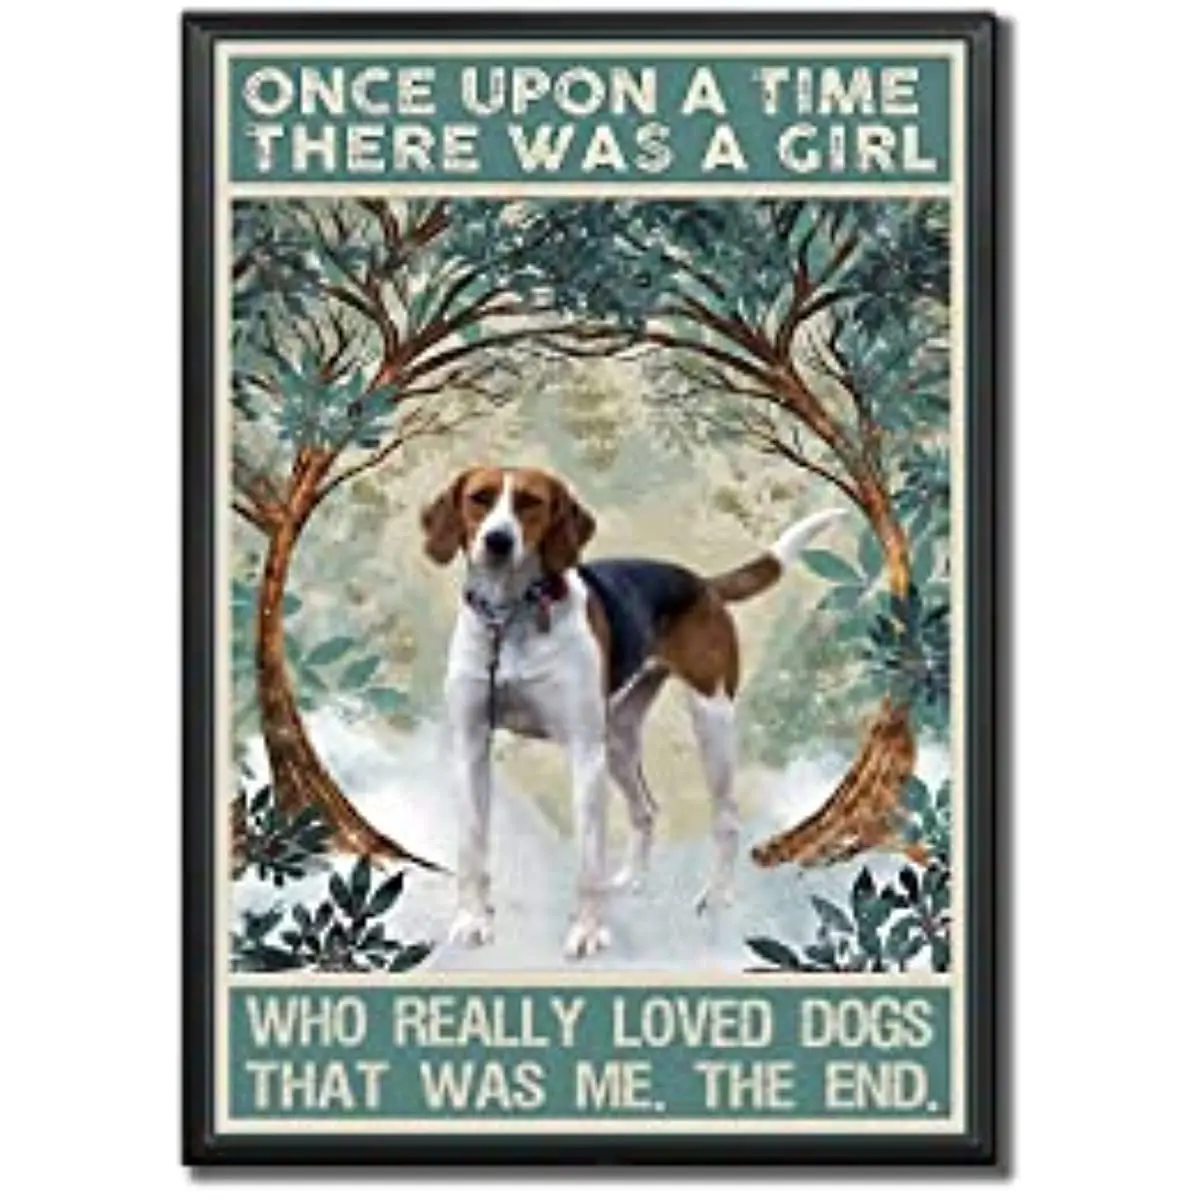 

New There used to be a girl who loved dog posters, and she was my ornament Bathroom bedroom wall decoration Metal Wall Tin Sign